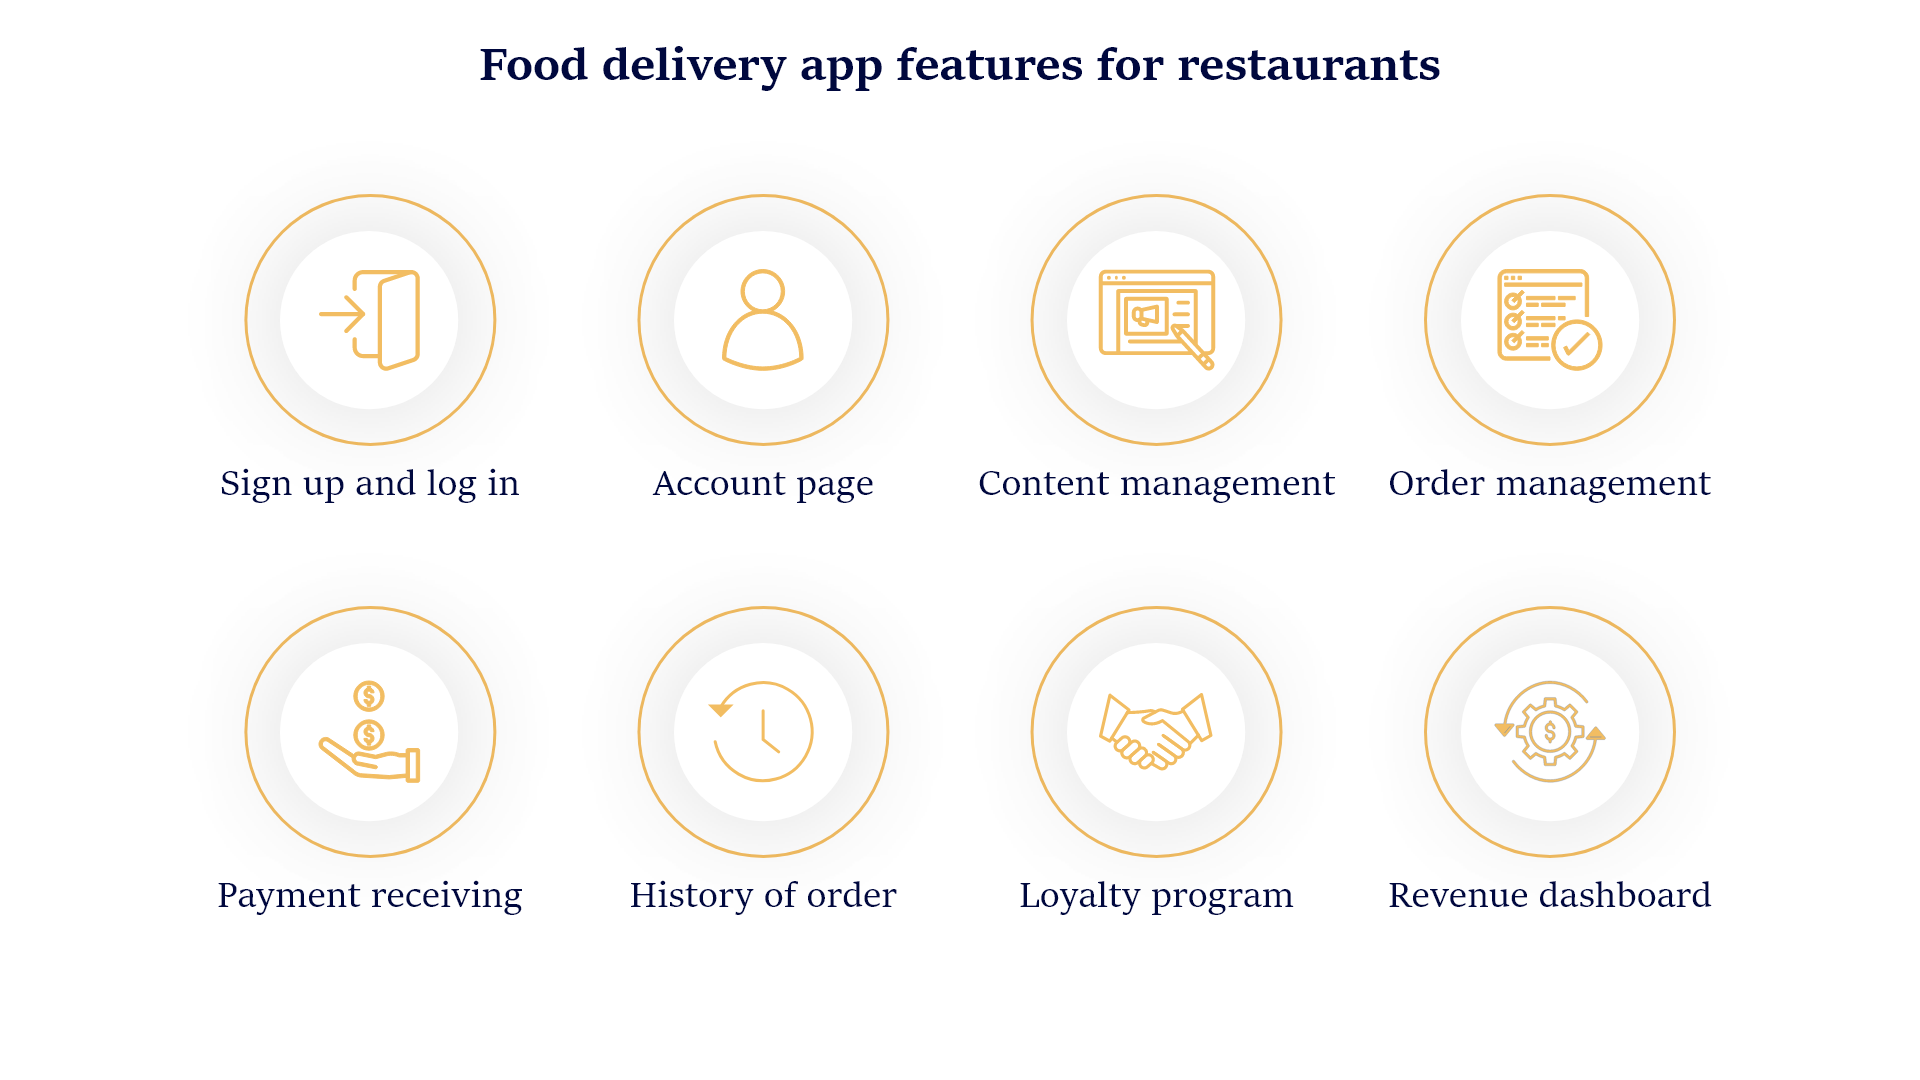 Expanding Swiggy Beyond Just a Food Delivery App